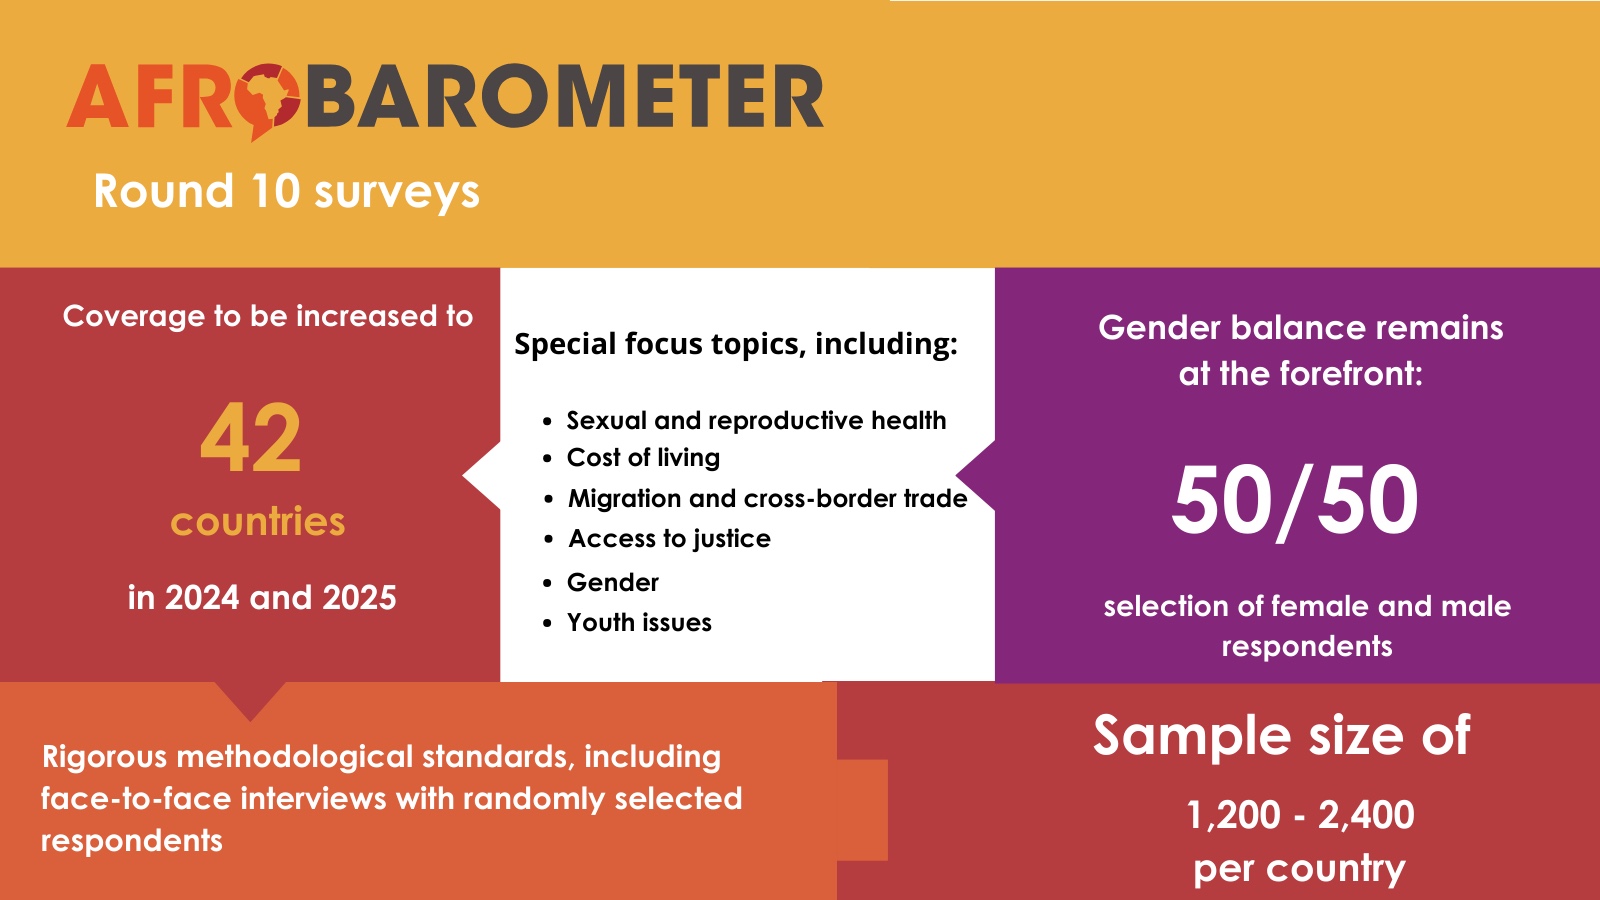 Afrobarometer debuts Round 10 surveys, aims to increase footprint to about 42 countries by 2025